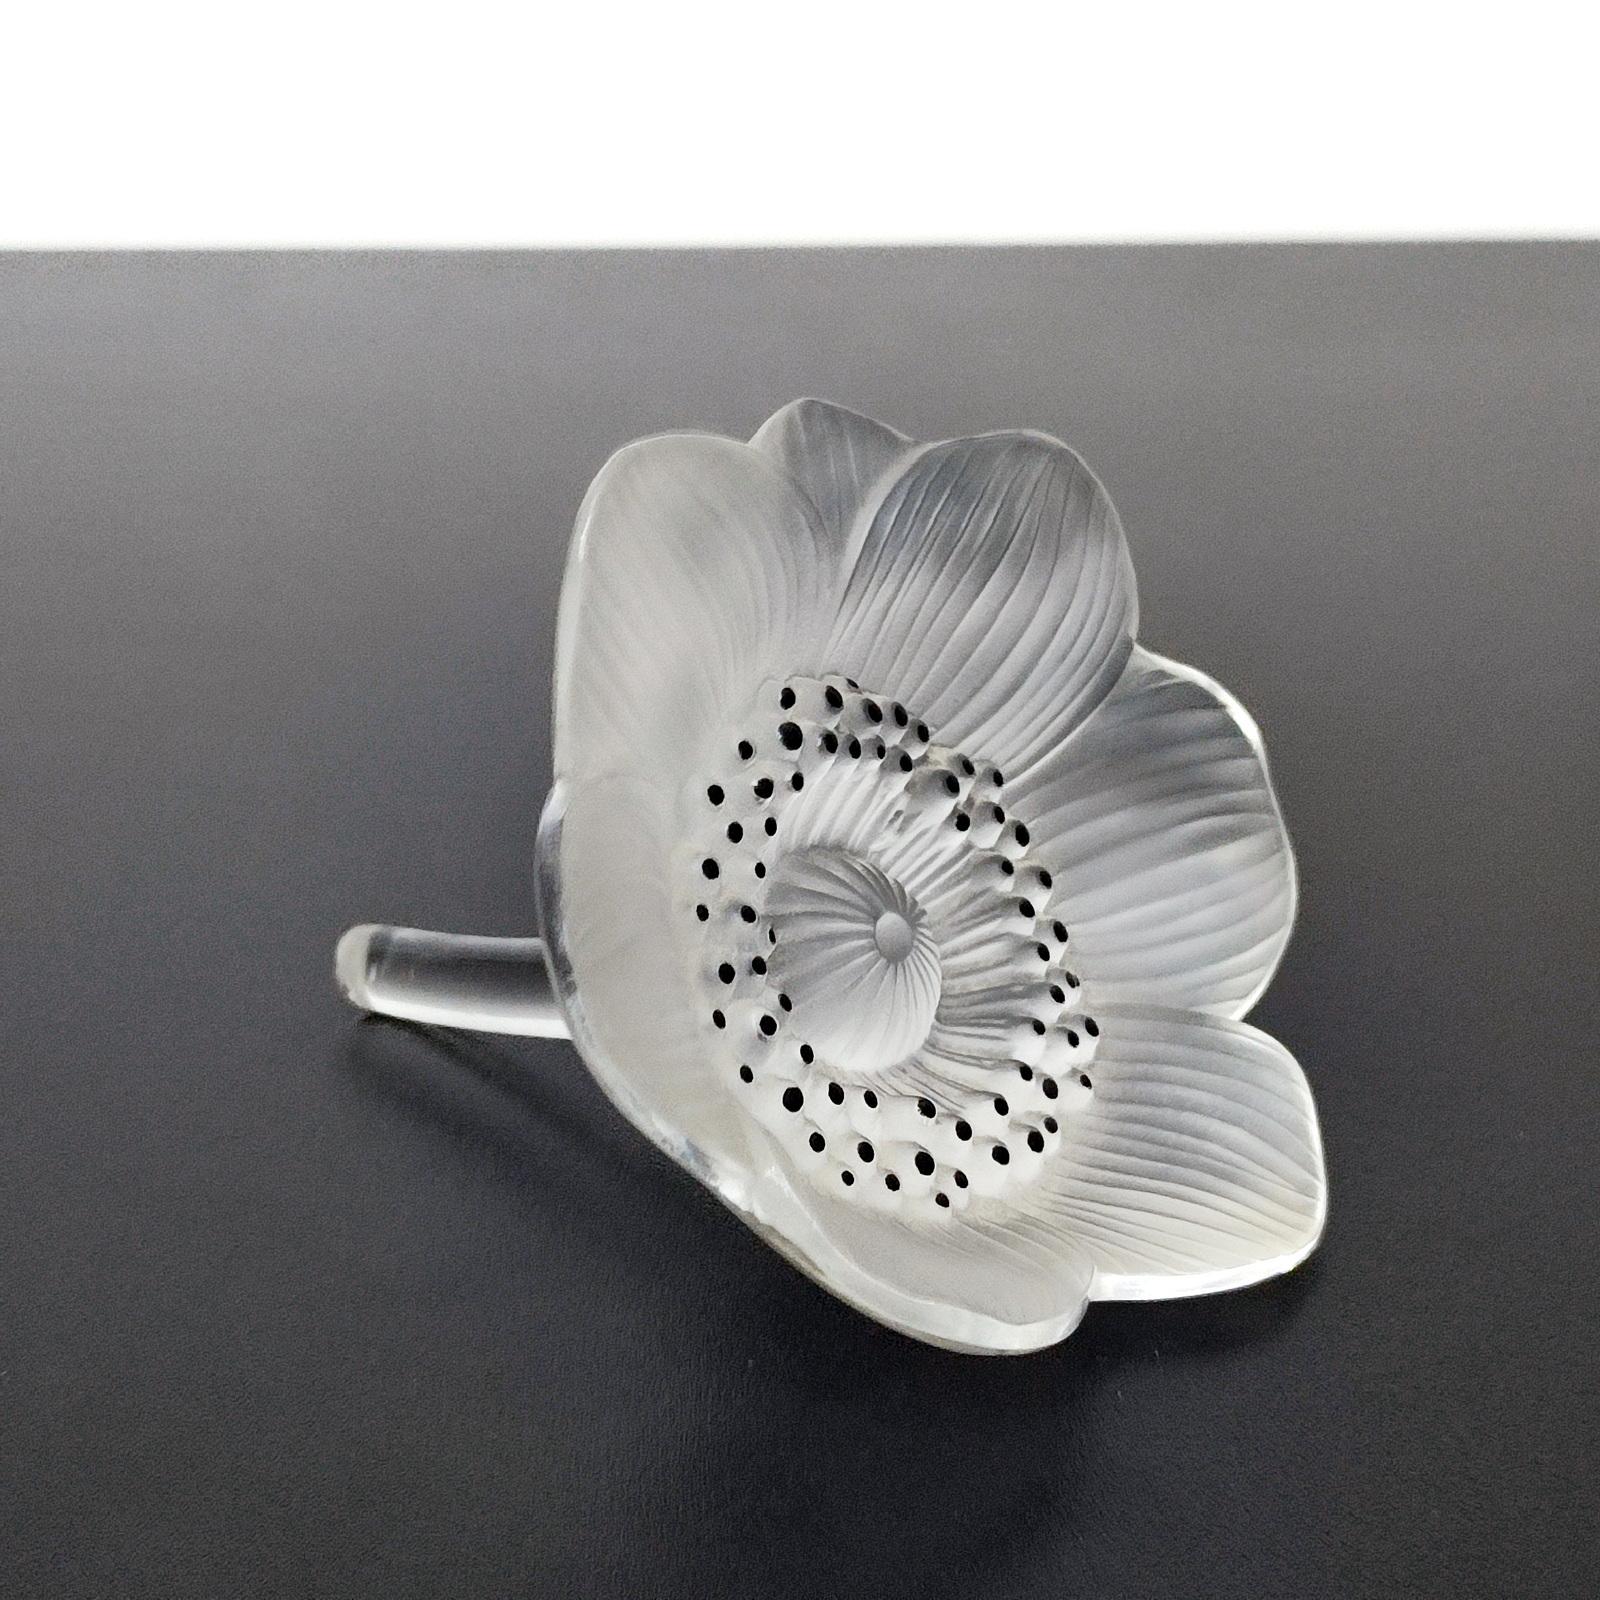 Late 20th Century Lalique France Vintage Anemone Flower Sculpture, Paperweight - FREE SHIPPING For Sale